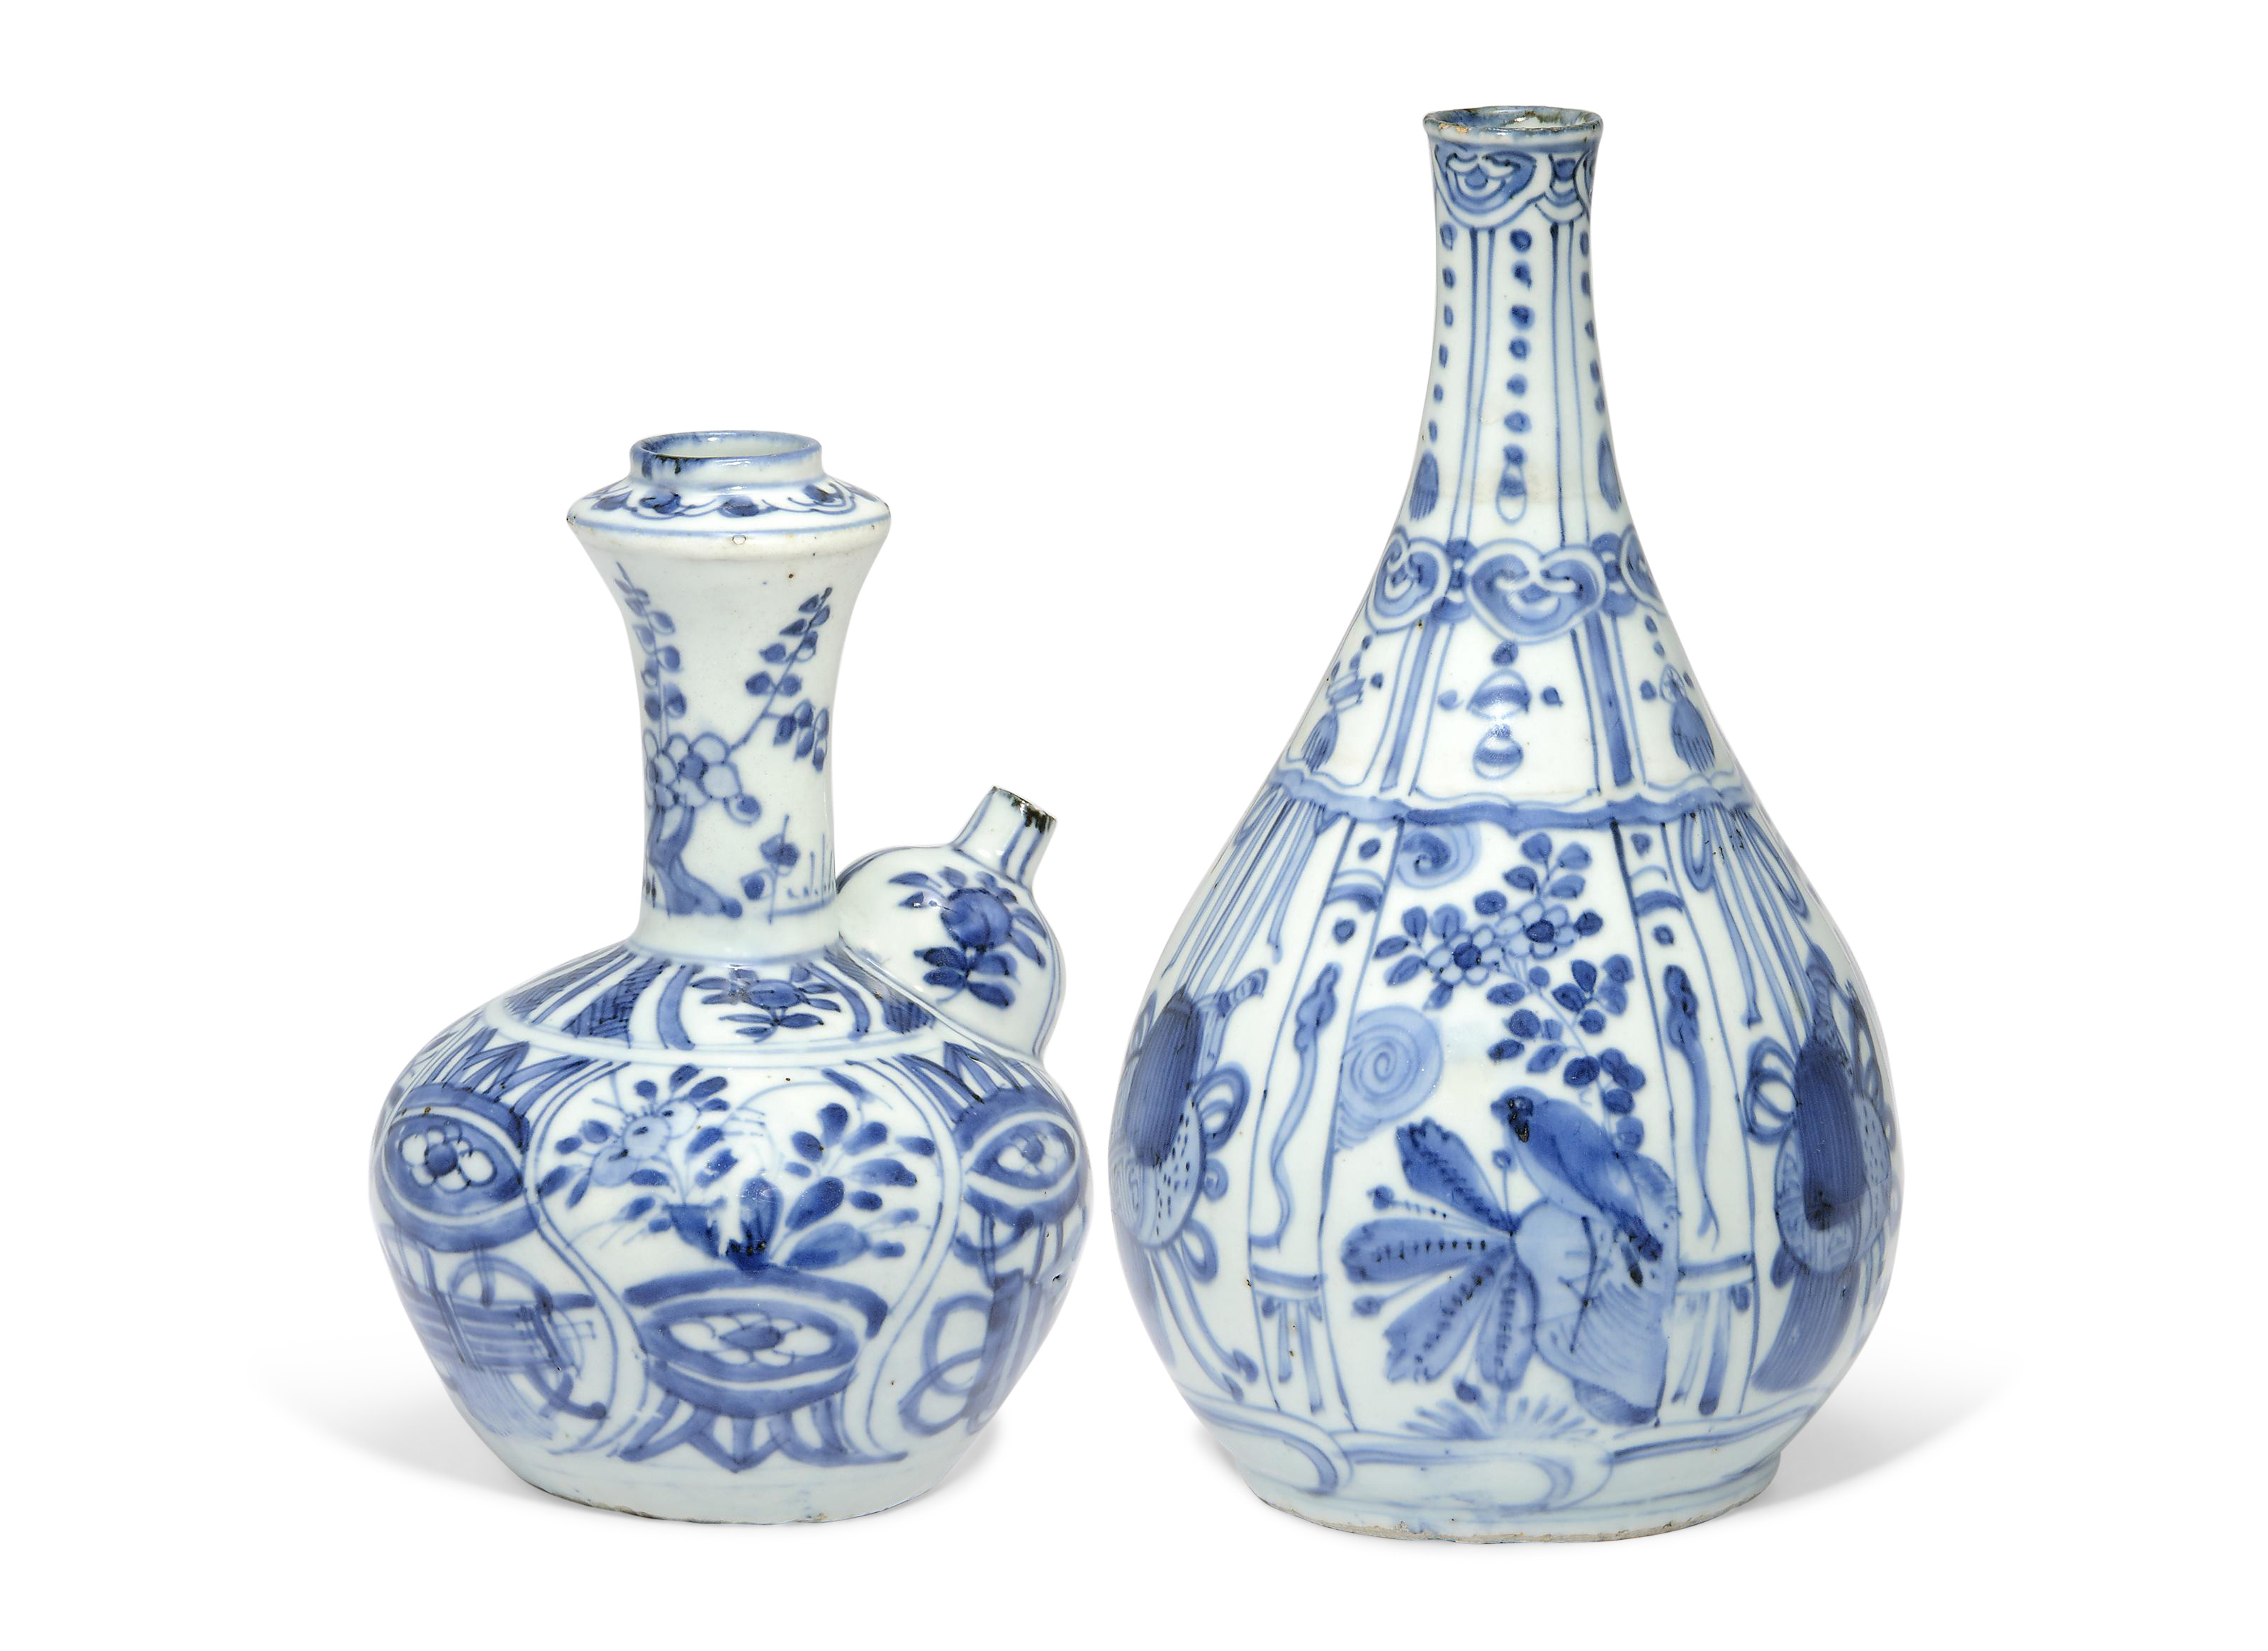 17 Lovely Blue and White Vases Cheap 2024 free download blue and white vases cheap of a blue and white kendi and a bottle vase wanli period 1573 1619 inside a blue and white kendi and a bottle vase wanli period 1573 1619 christies